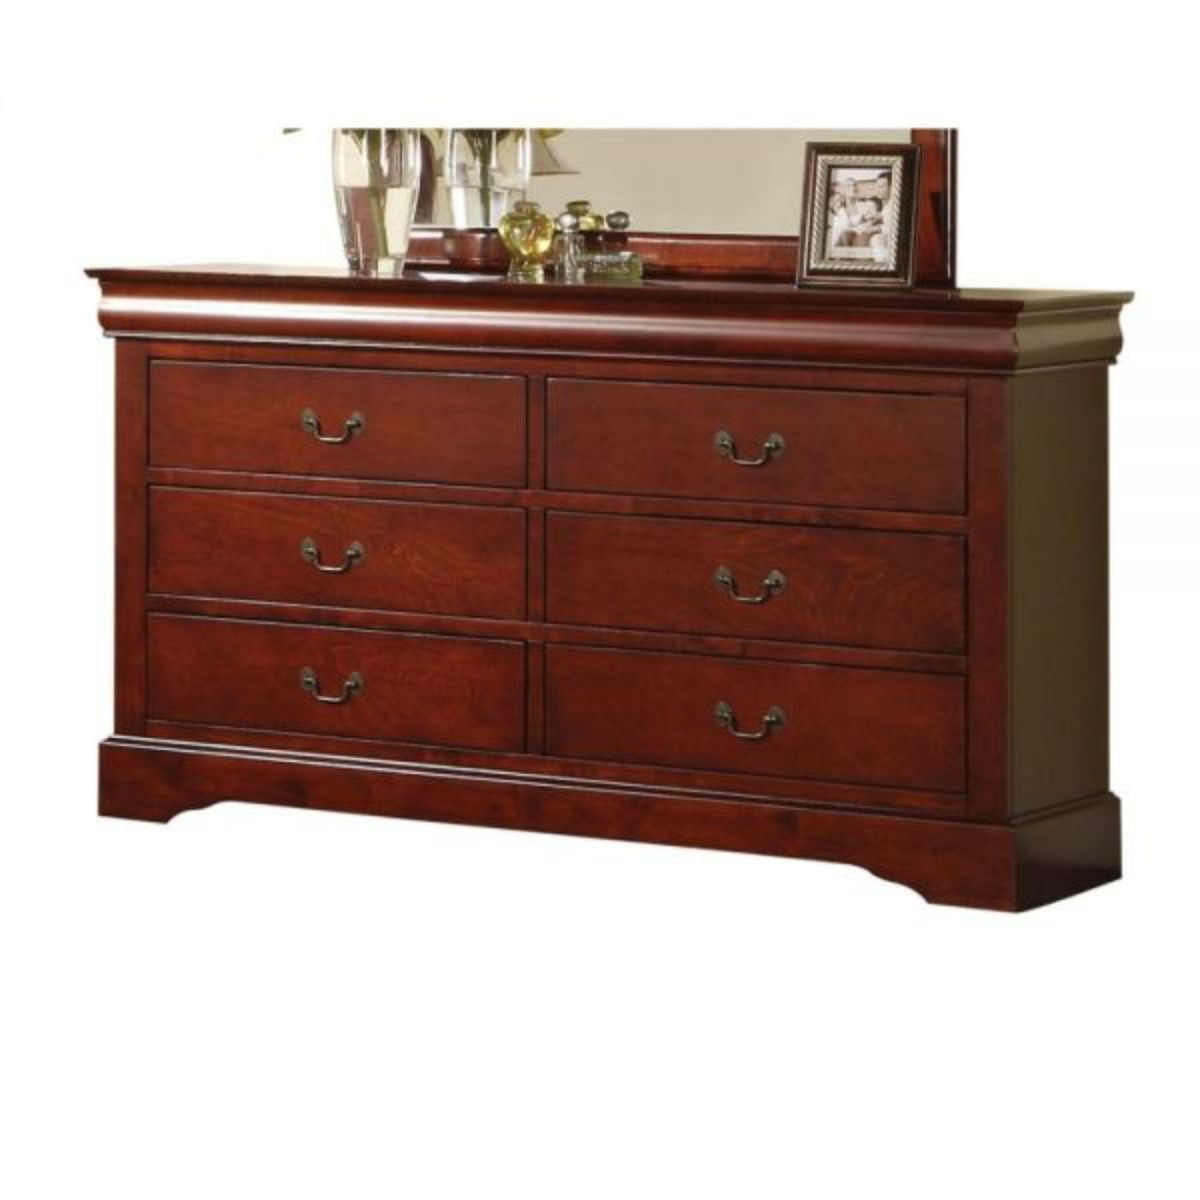 60" Brown Solid and Manufactured Wood Six Drawer Double Dresser